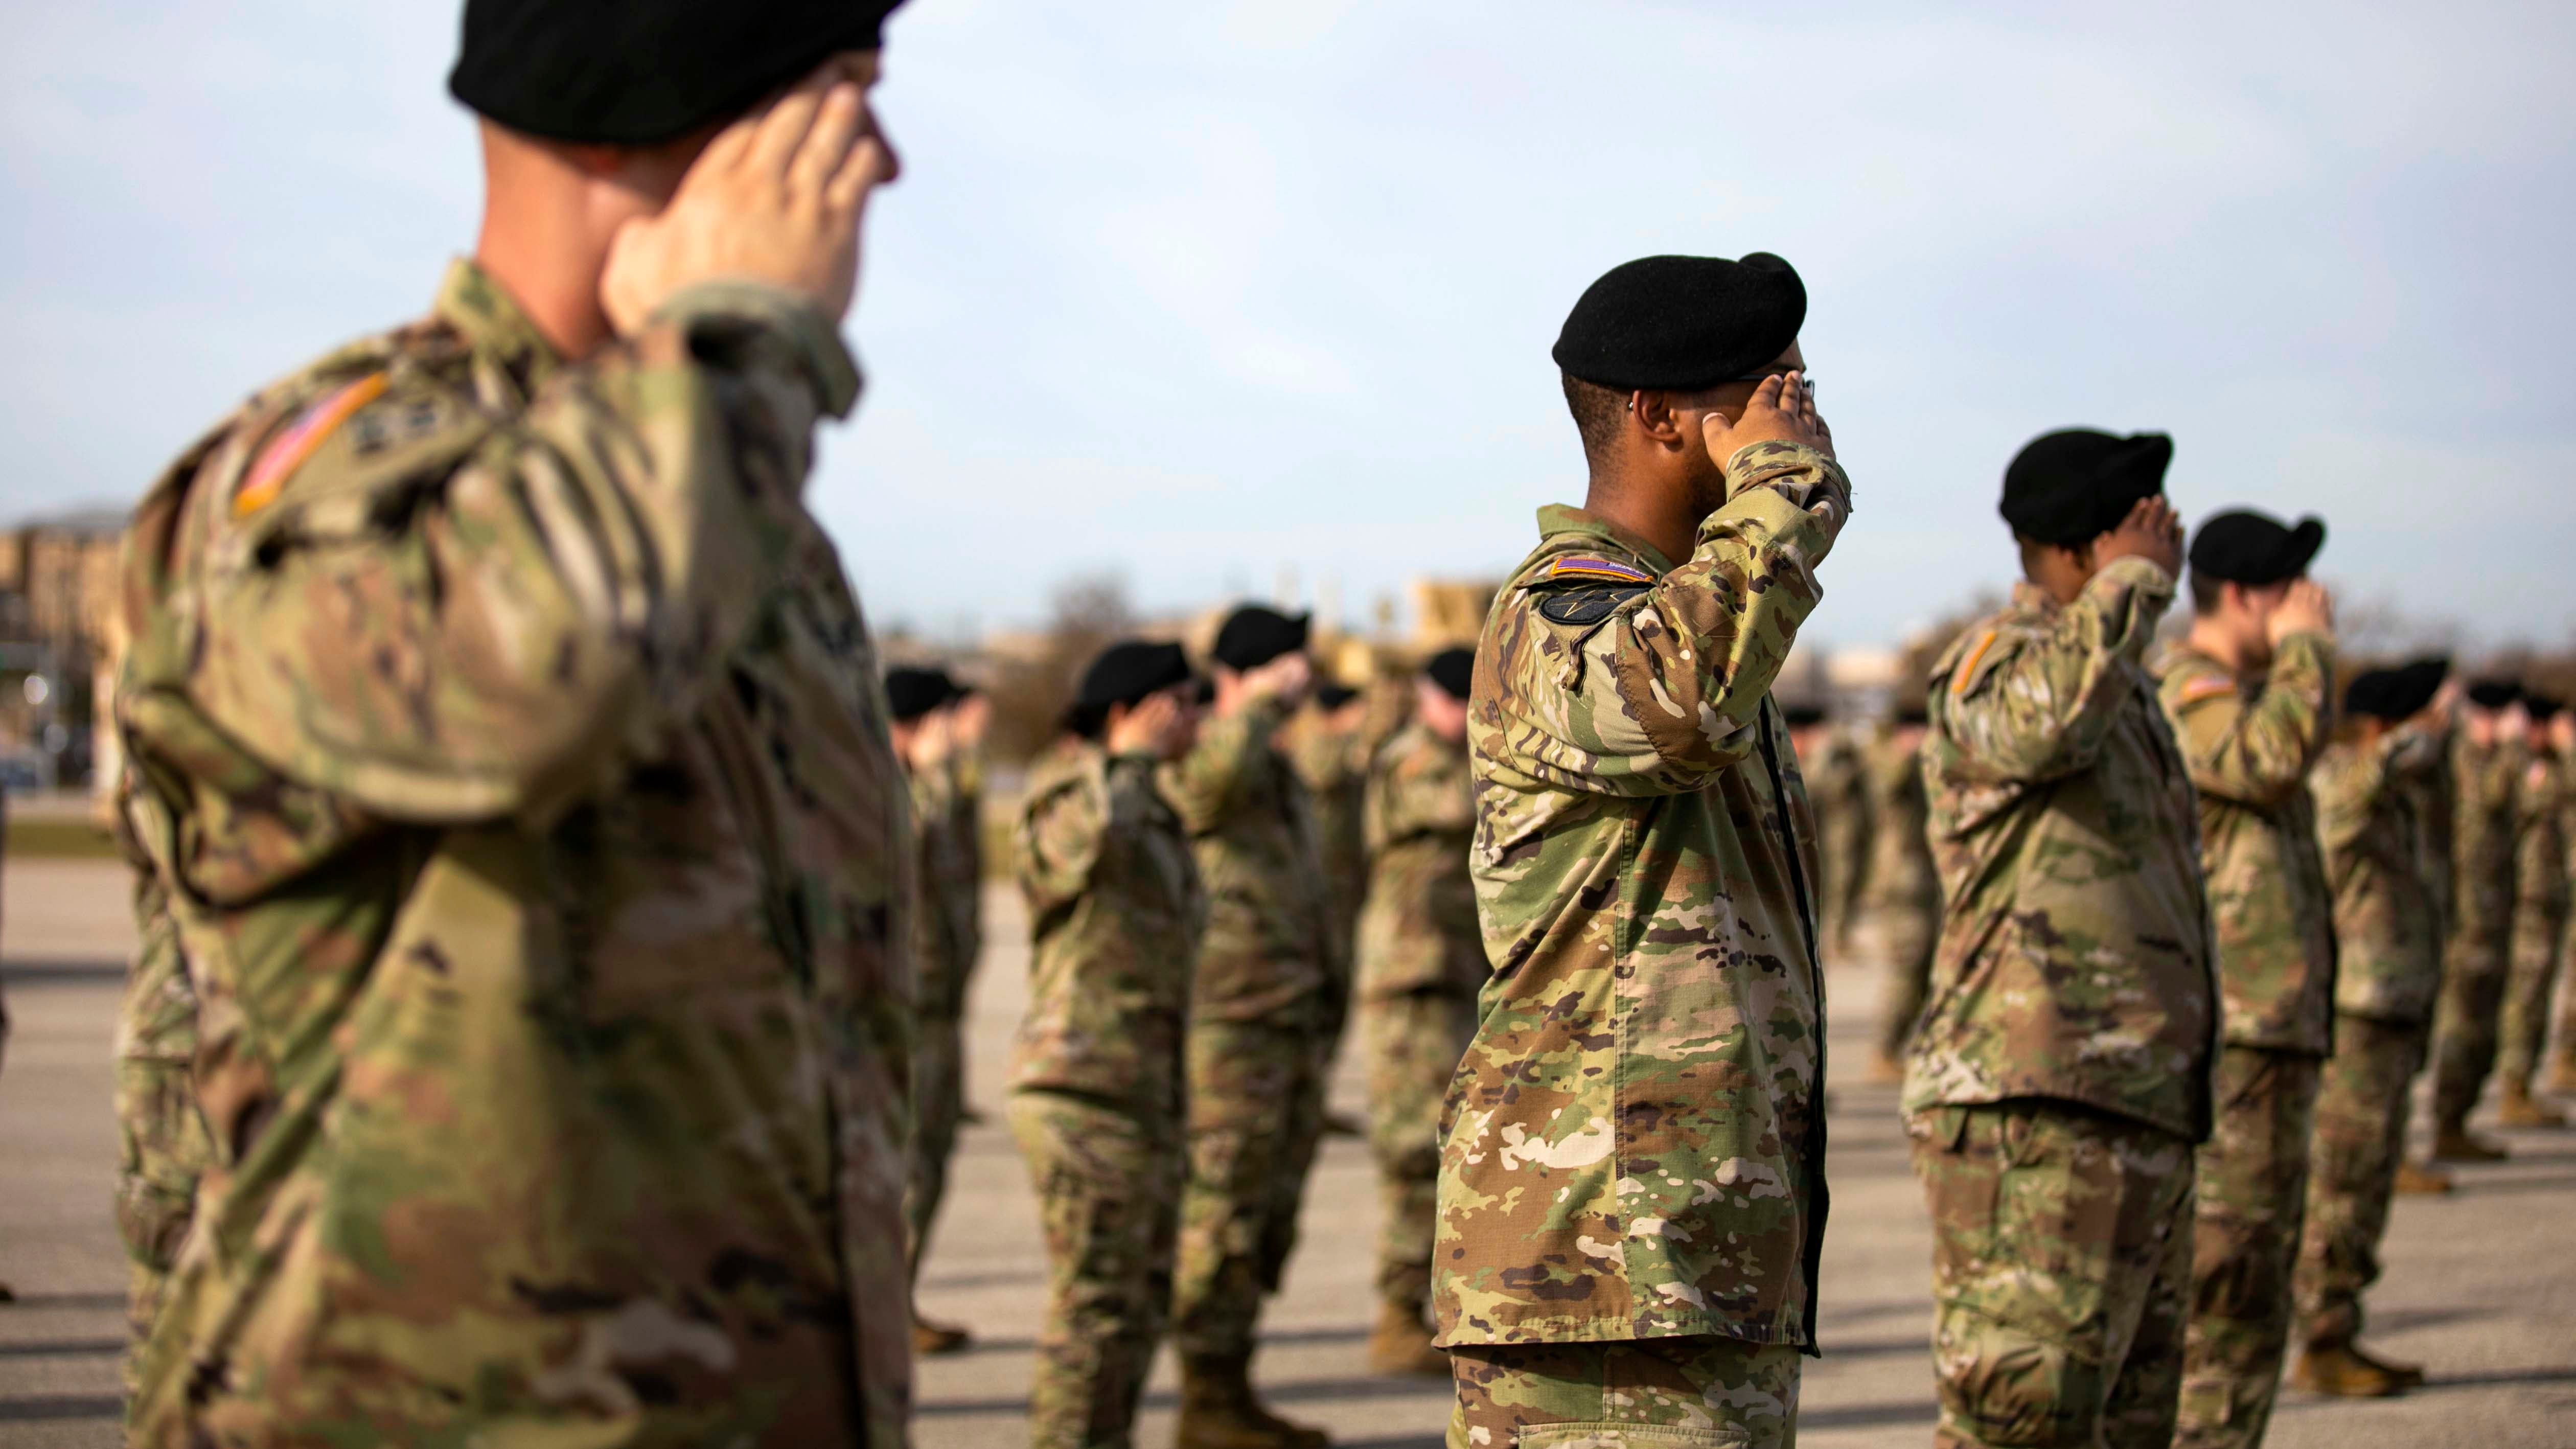 Soldiers saluting